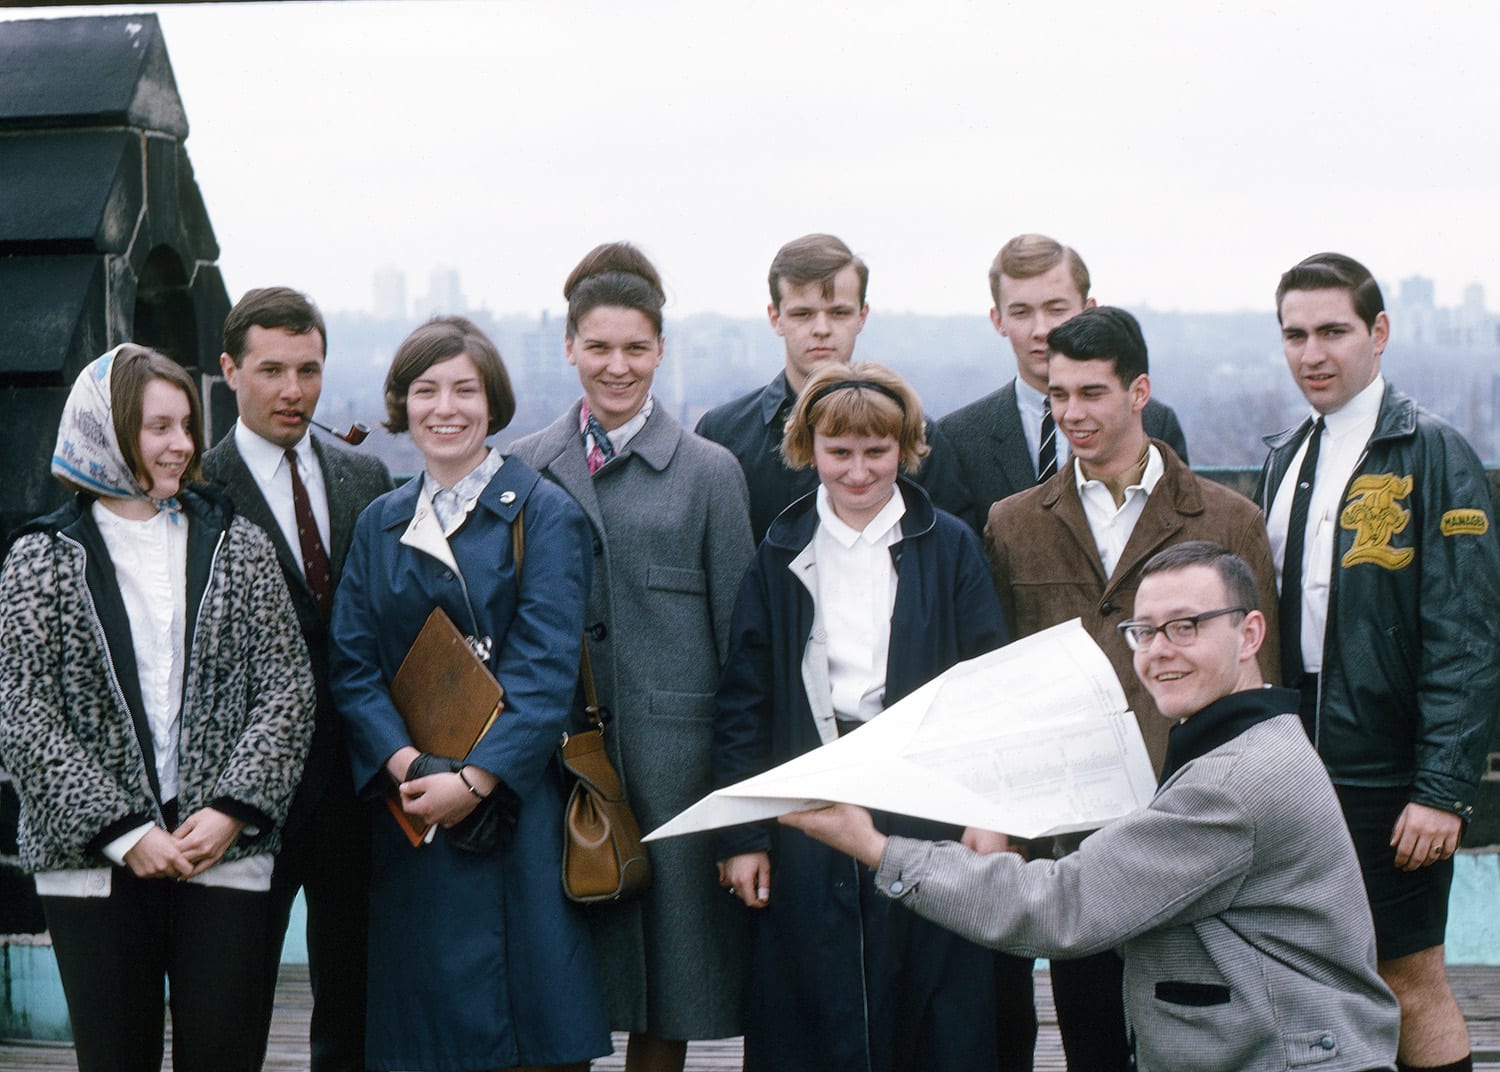 Smiling people posing for a photo, one person in front holding a large exam timetable folded into a paper airplane